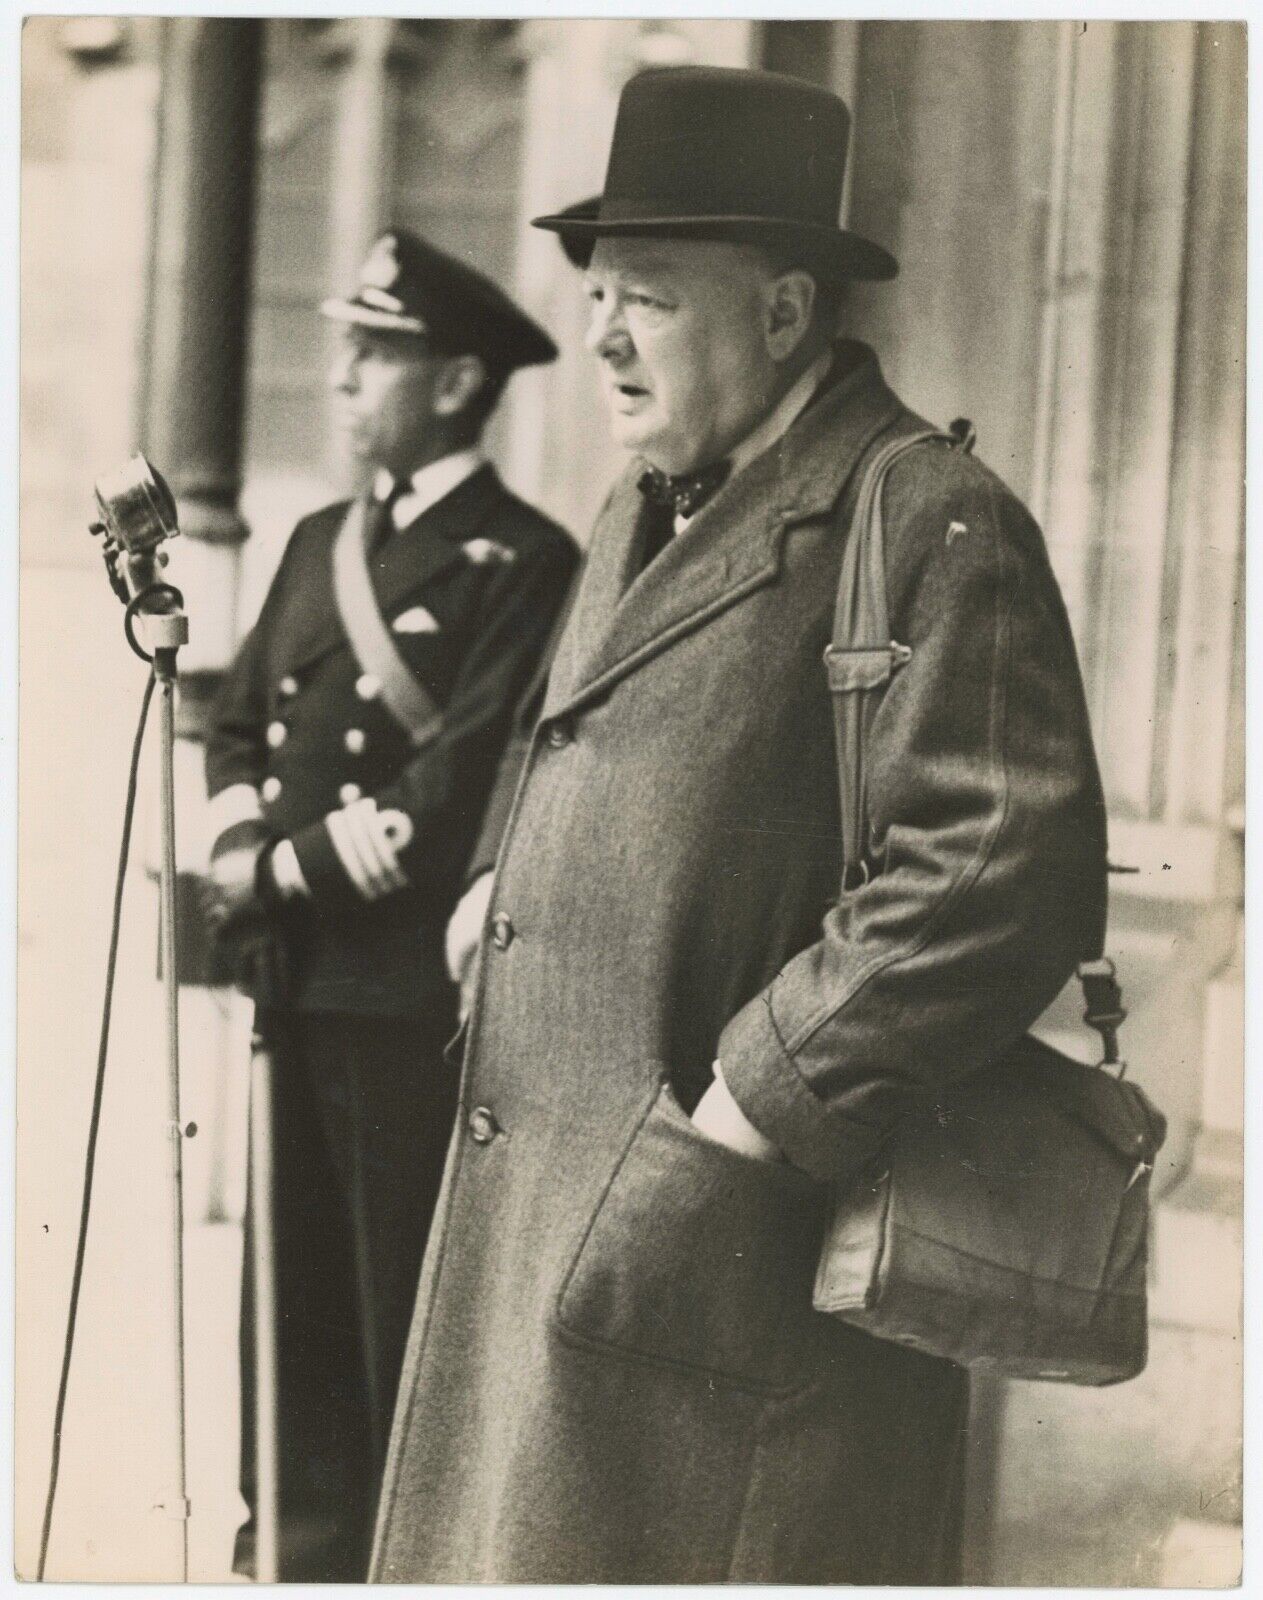 12 May 1942 press photo of Churchill addressing the Parliamentary Home Guard